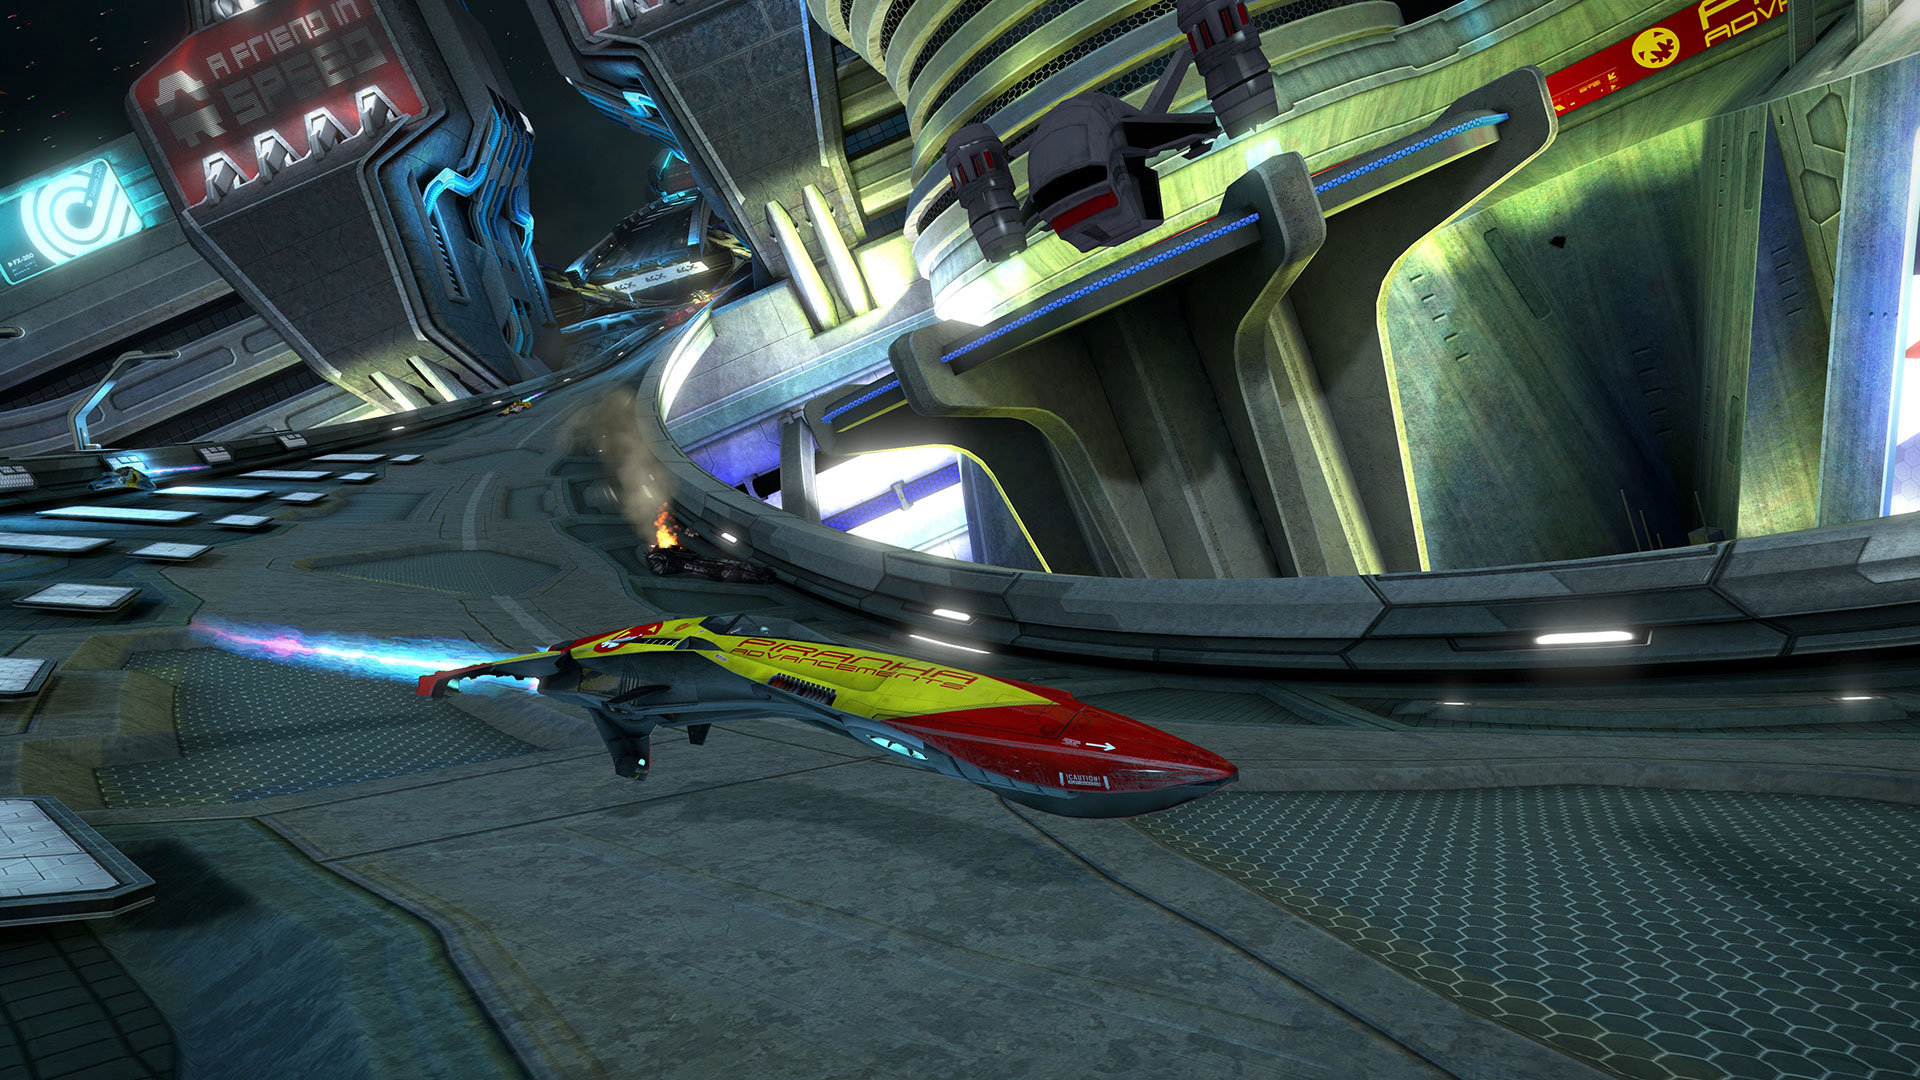 Media asset in full size related to 3dfxzone.it news item entitled as follows: Wipeout Omega Collection: Sony pubblica trailer, screenshots e data di lancio | Image Name: news26090_Wipeout-Omega-Collection_1.jpg